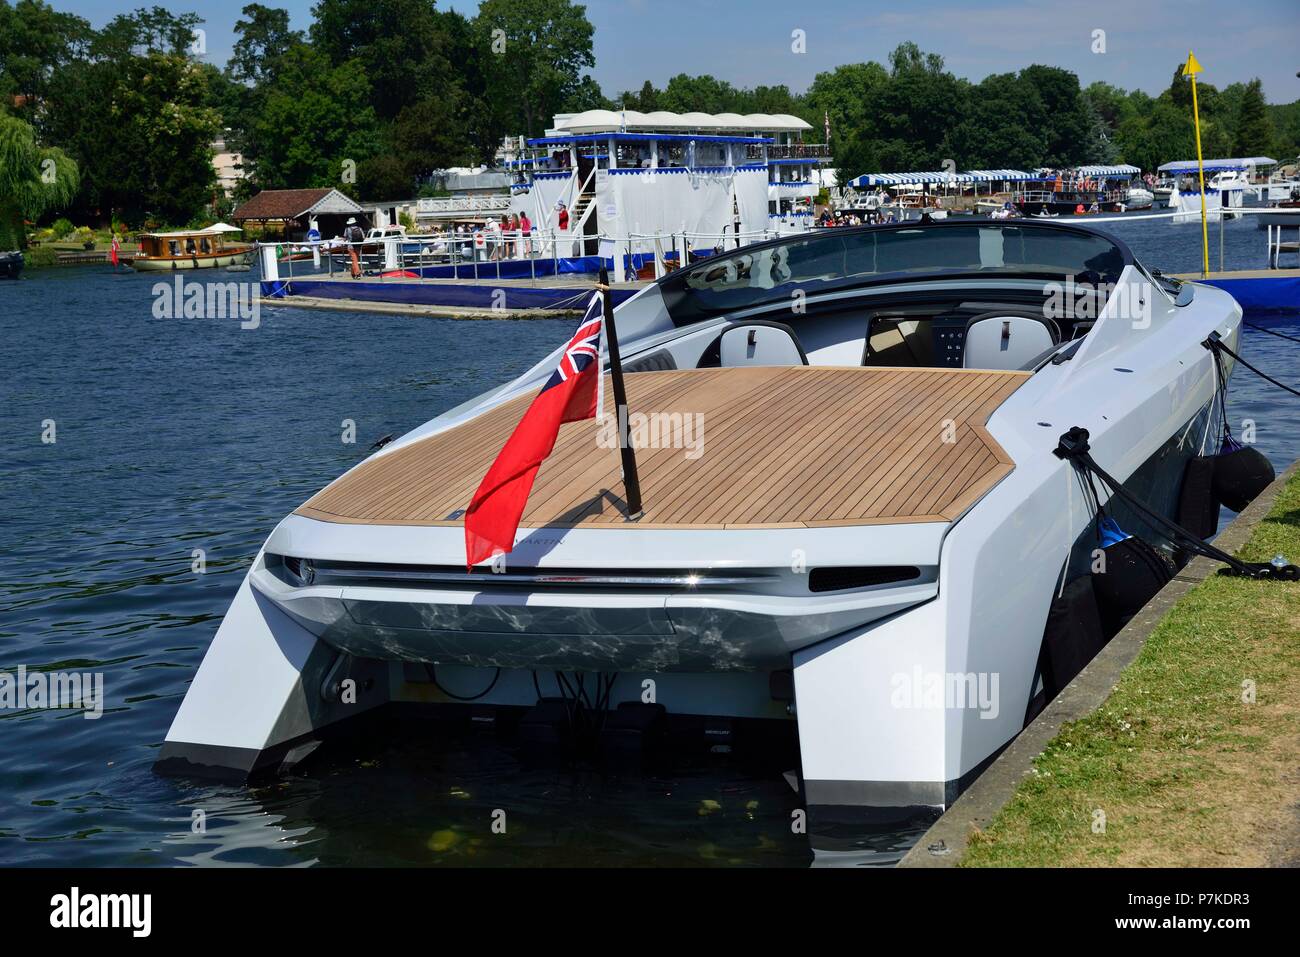 Henley-on-Thames, UK. 6th July 2018. Henley Royal Regatta has for the first time in its 178 year history partnered with four prestigious British brands one of whom is Aston Martin who are showing several of their luxury cars together with this AM37 power boat.  This version is priced at £1.4M Credit Wendy Johnson/Alamy Live News Stock Photo